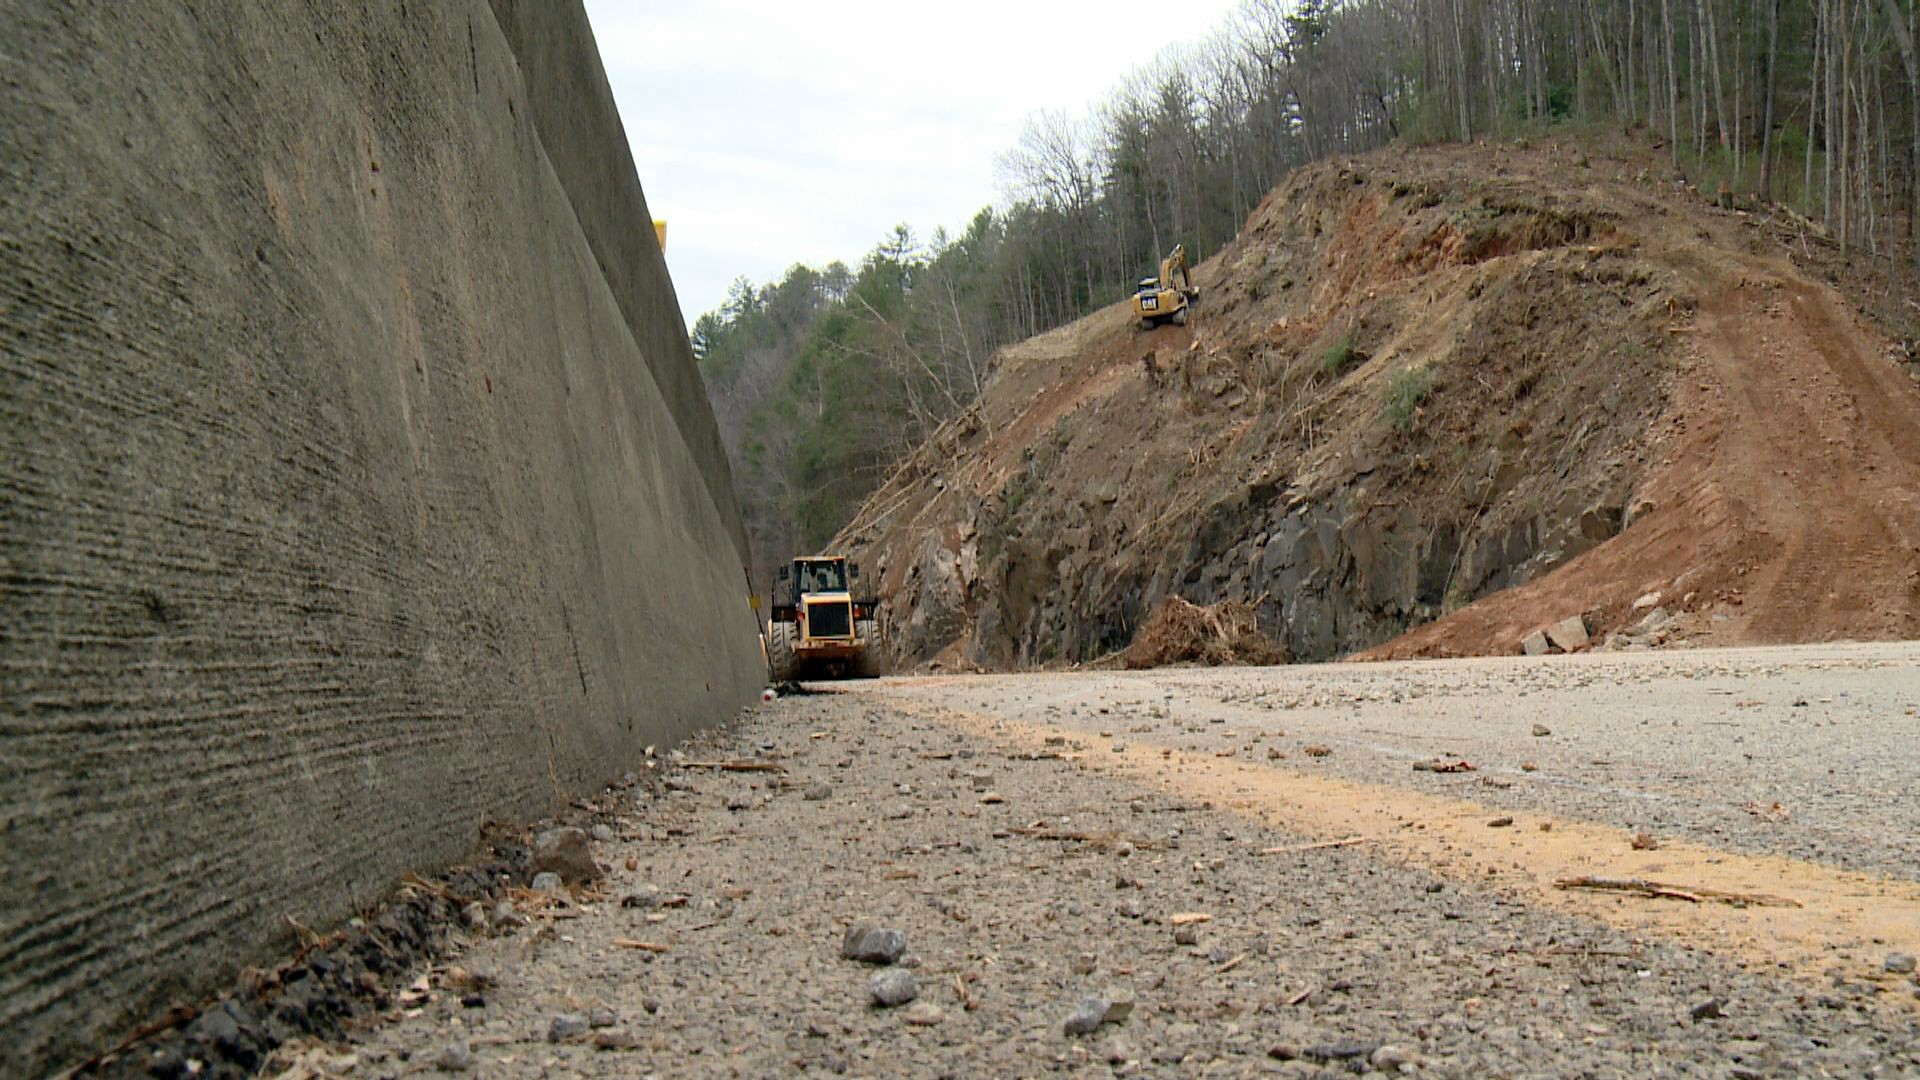 Half the lanes on I-40 are now open just across the state line in North Carolina where a rockslide shut down the interstate in both directions for the last six days.